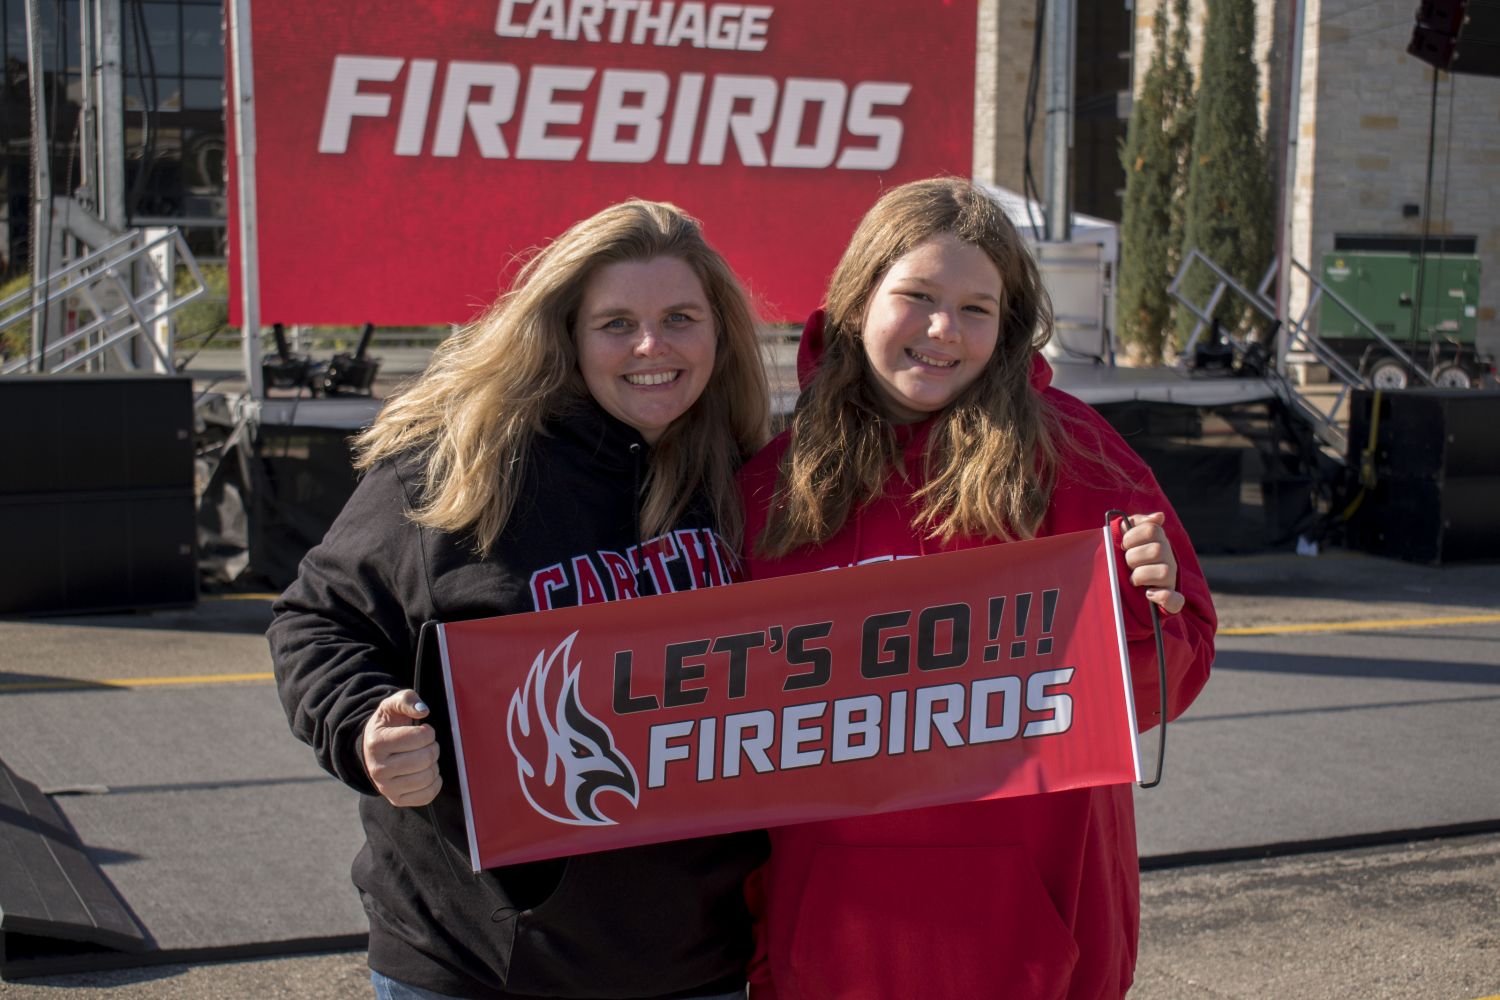 A couple of Firebirds fans show their spirit at Homecoming.